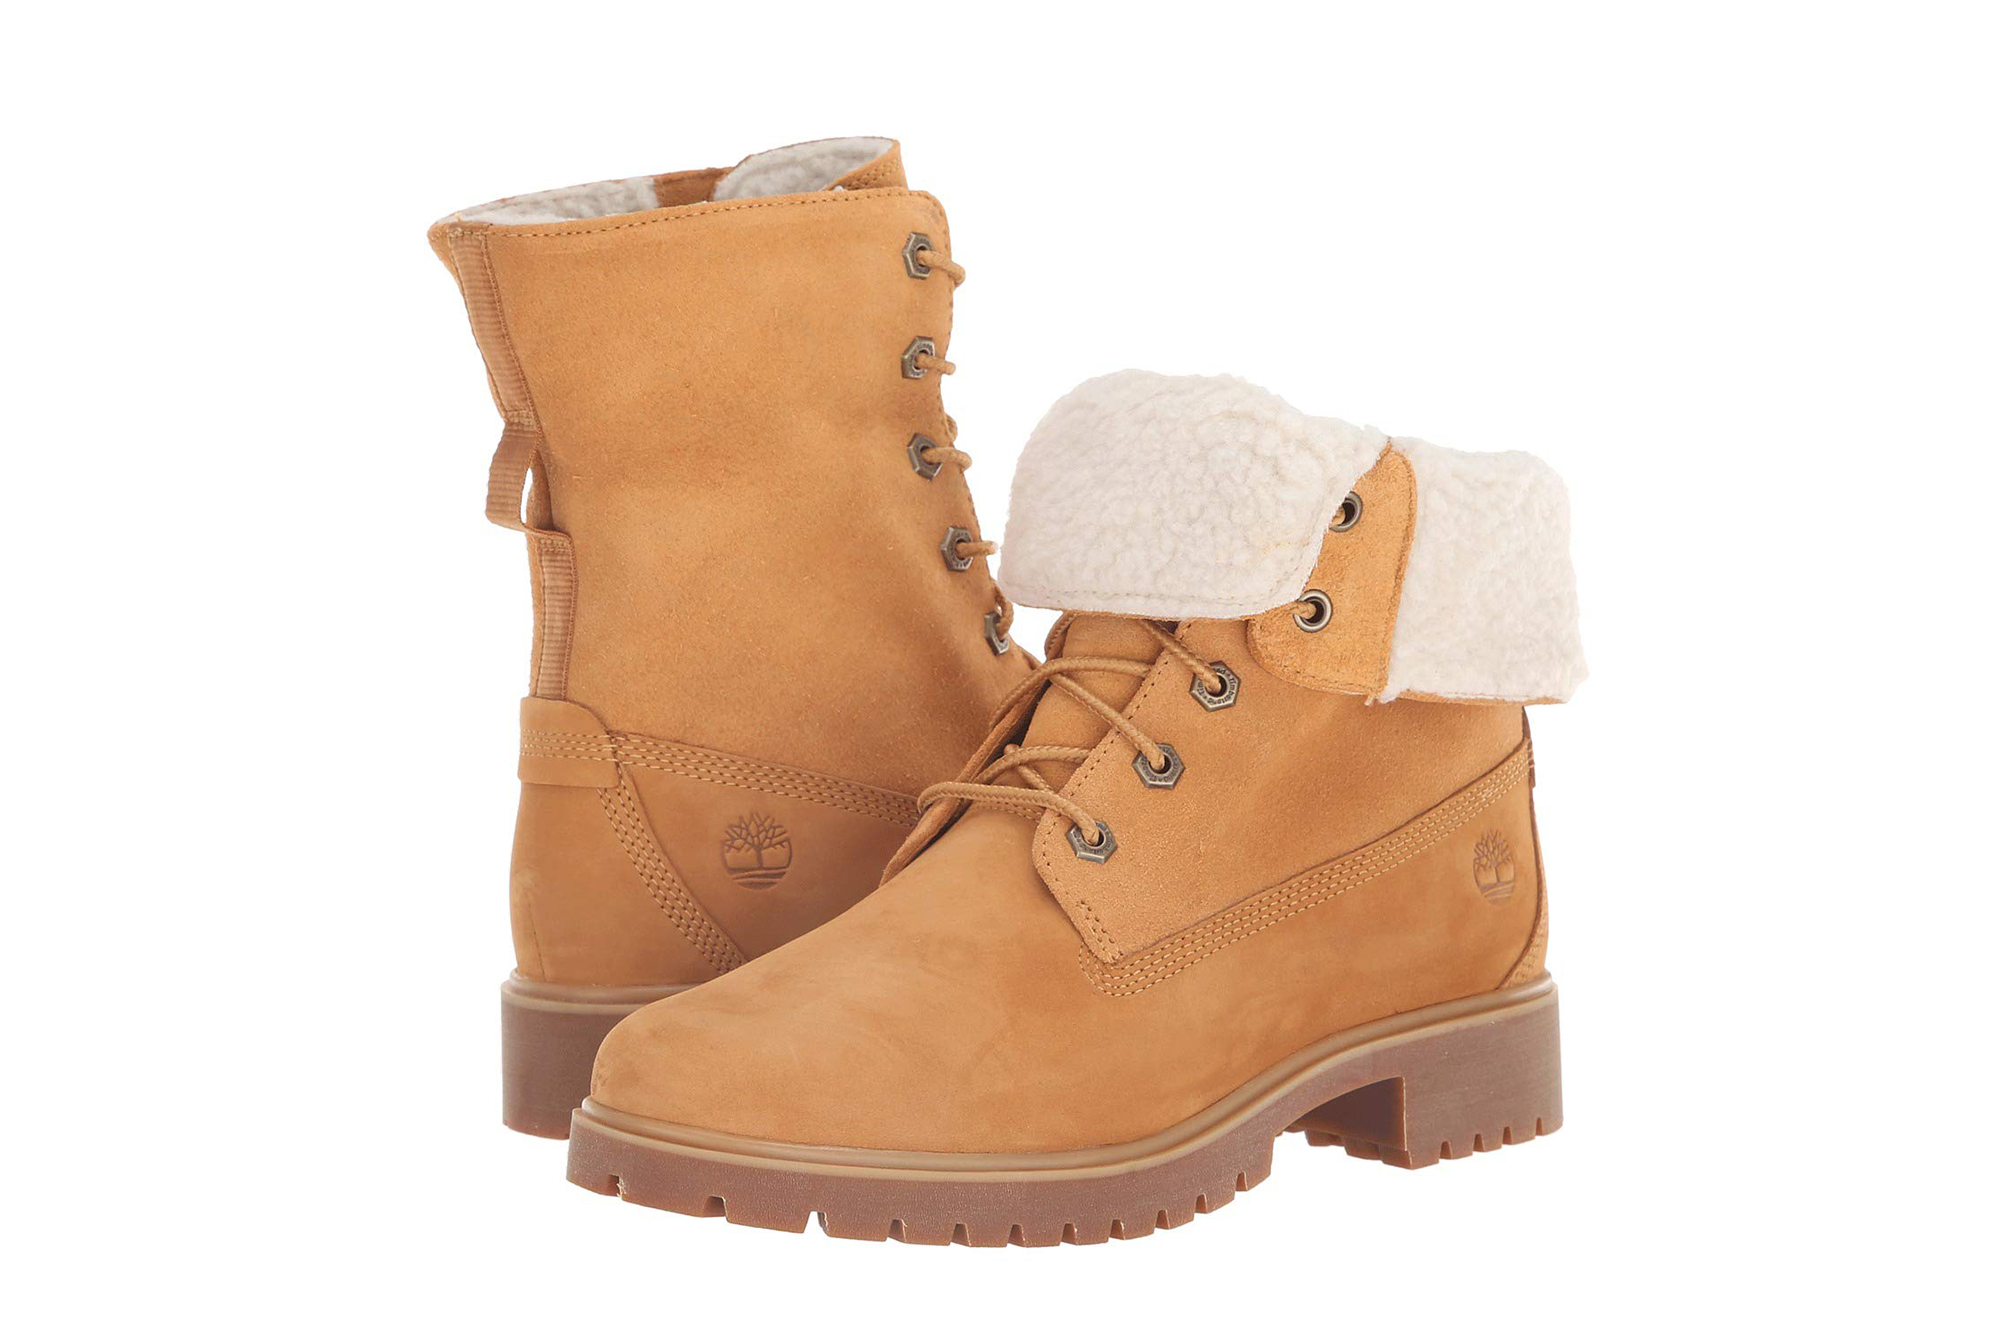 These 'Sleek Comfortable' Boots Will Be 'Go-To'